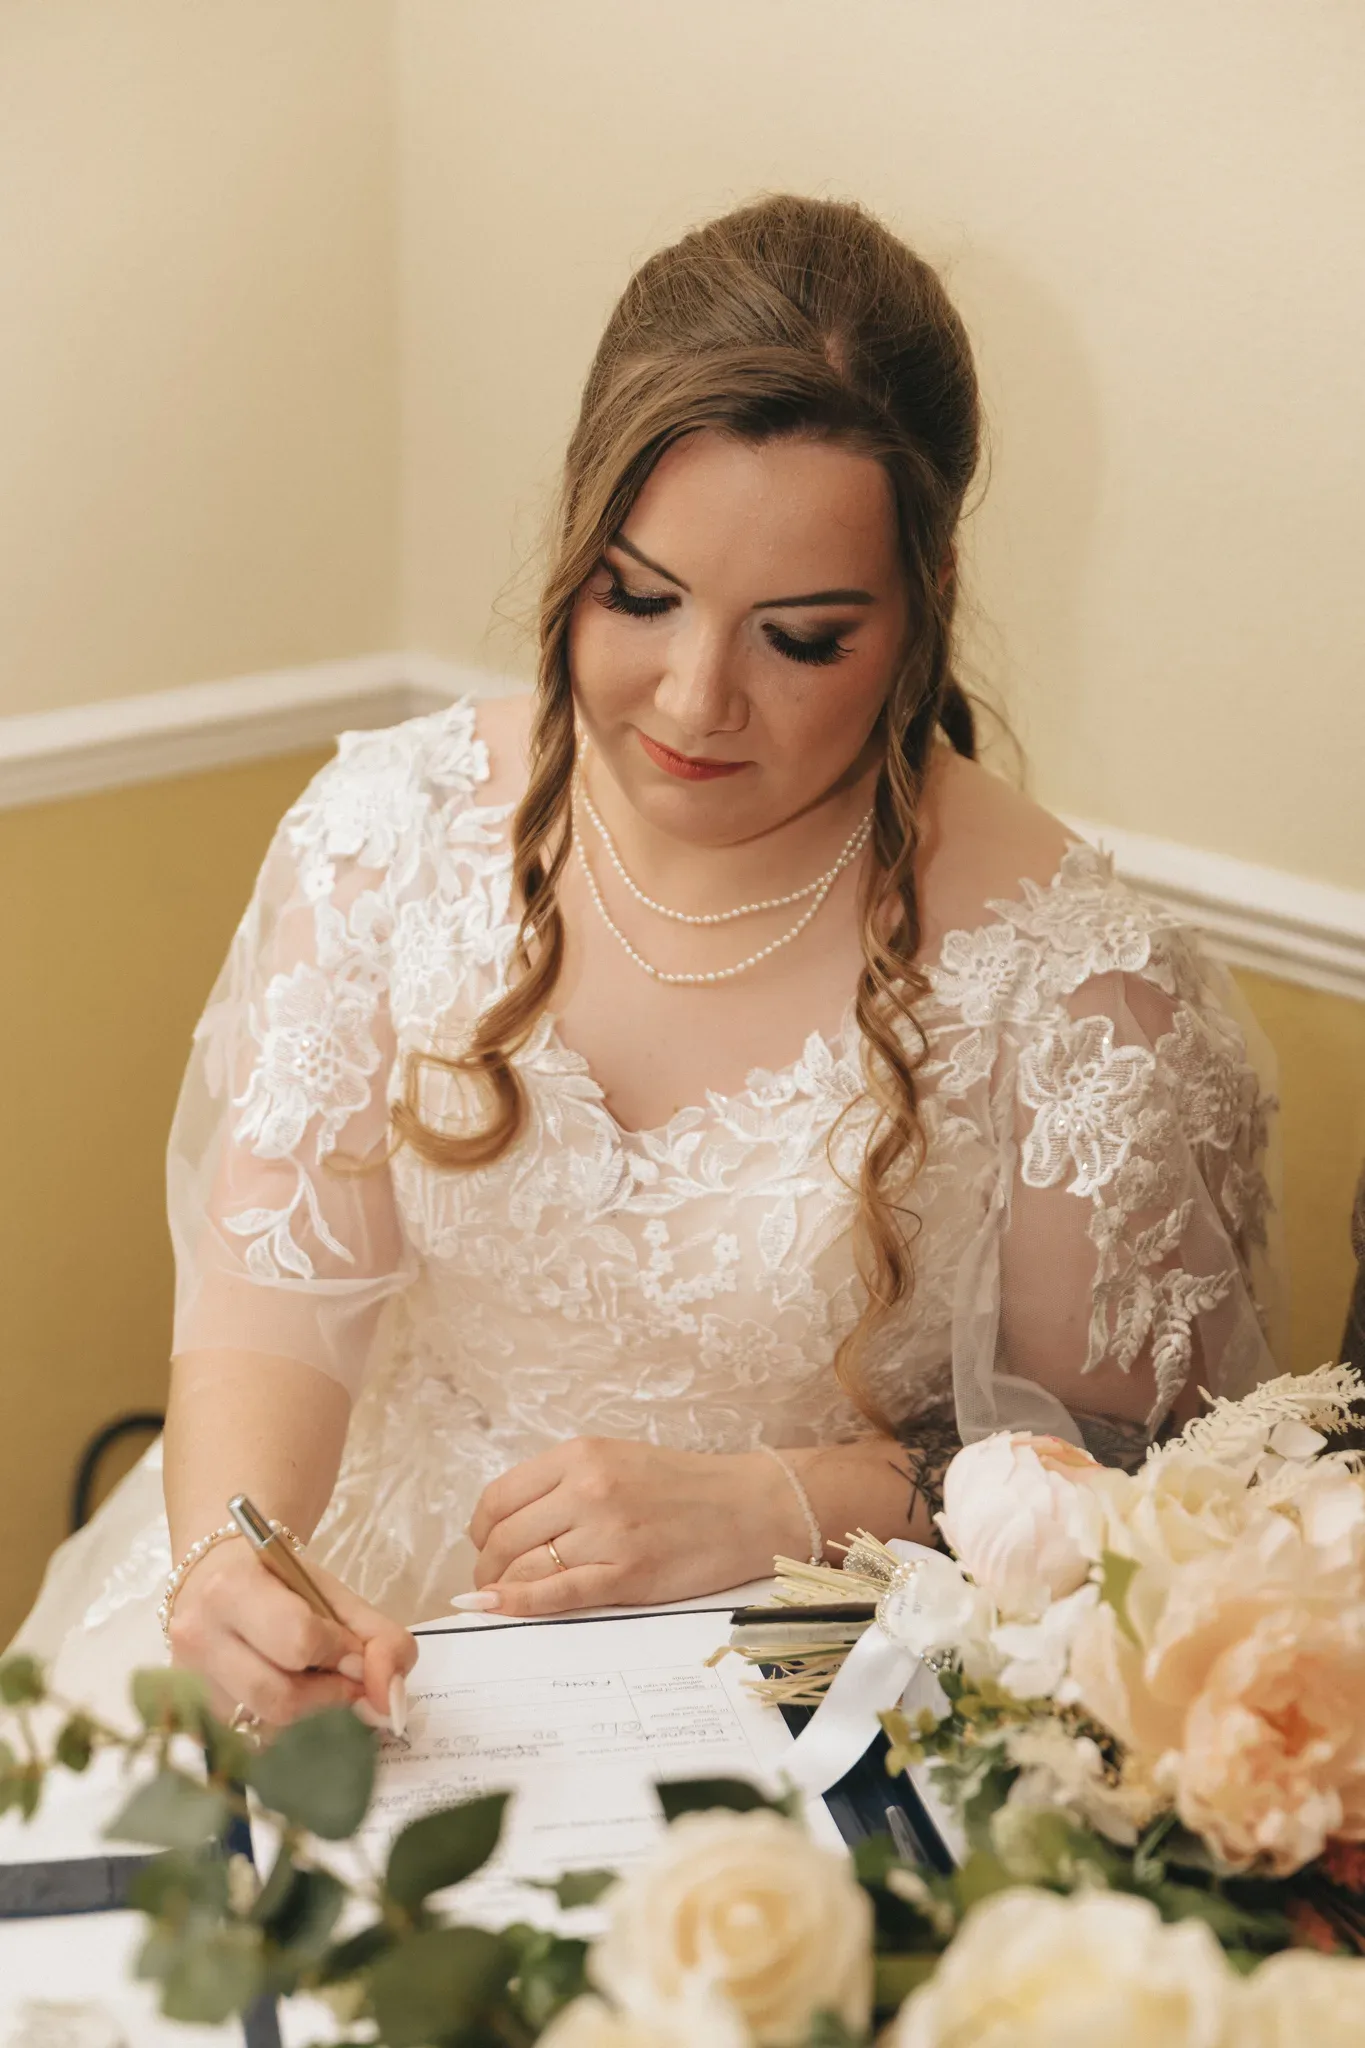 A bride in a lace dress and pearl necklace signs a document at a table adorned with floral bouquets, looking down with a gentle smile in a warmly lit room.